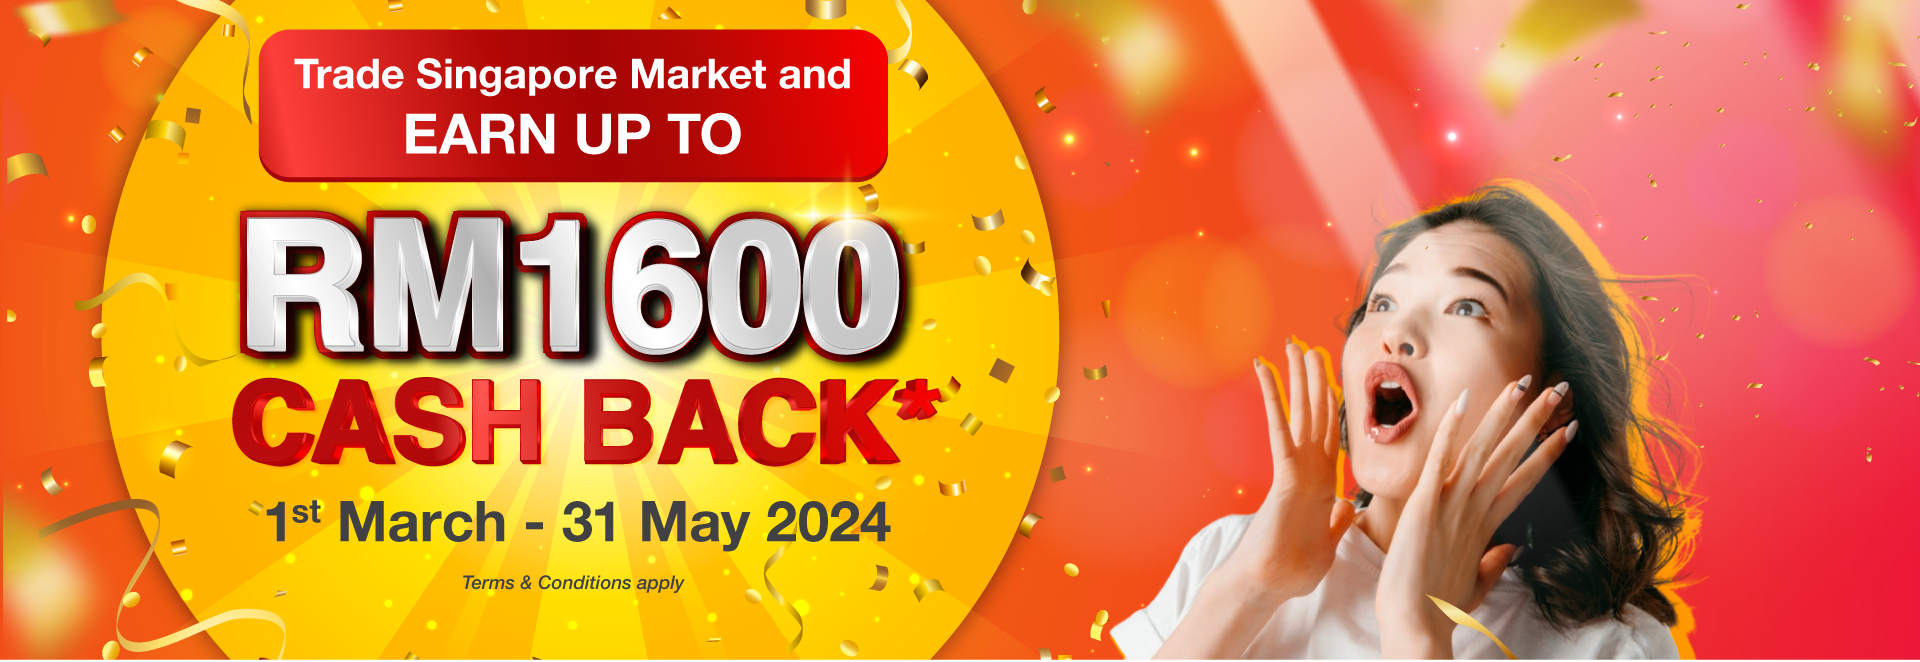 Trade Singapore Market and EARN UP TO RM 1500 CASHBACK*